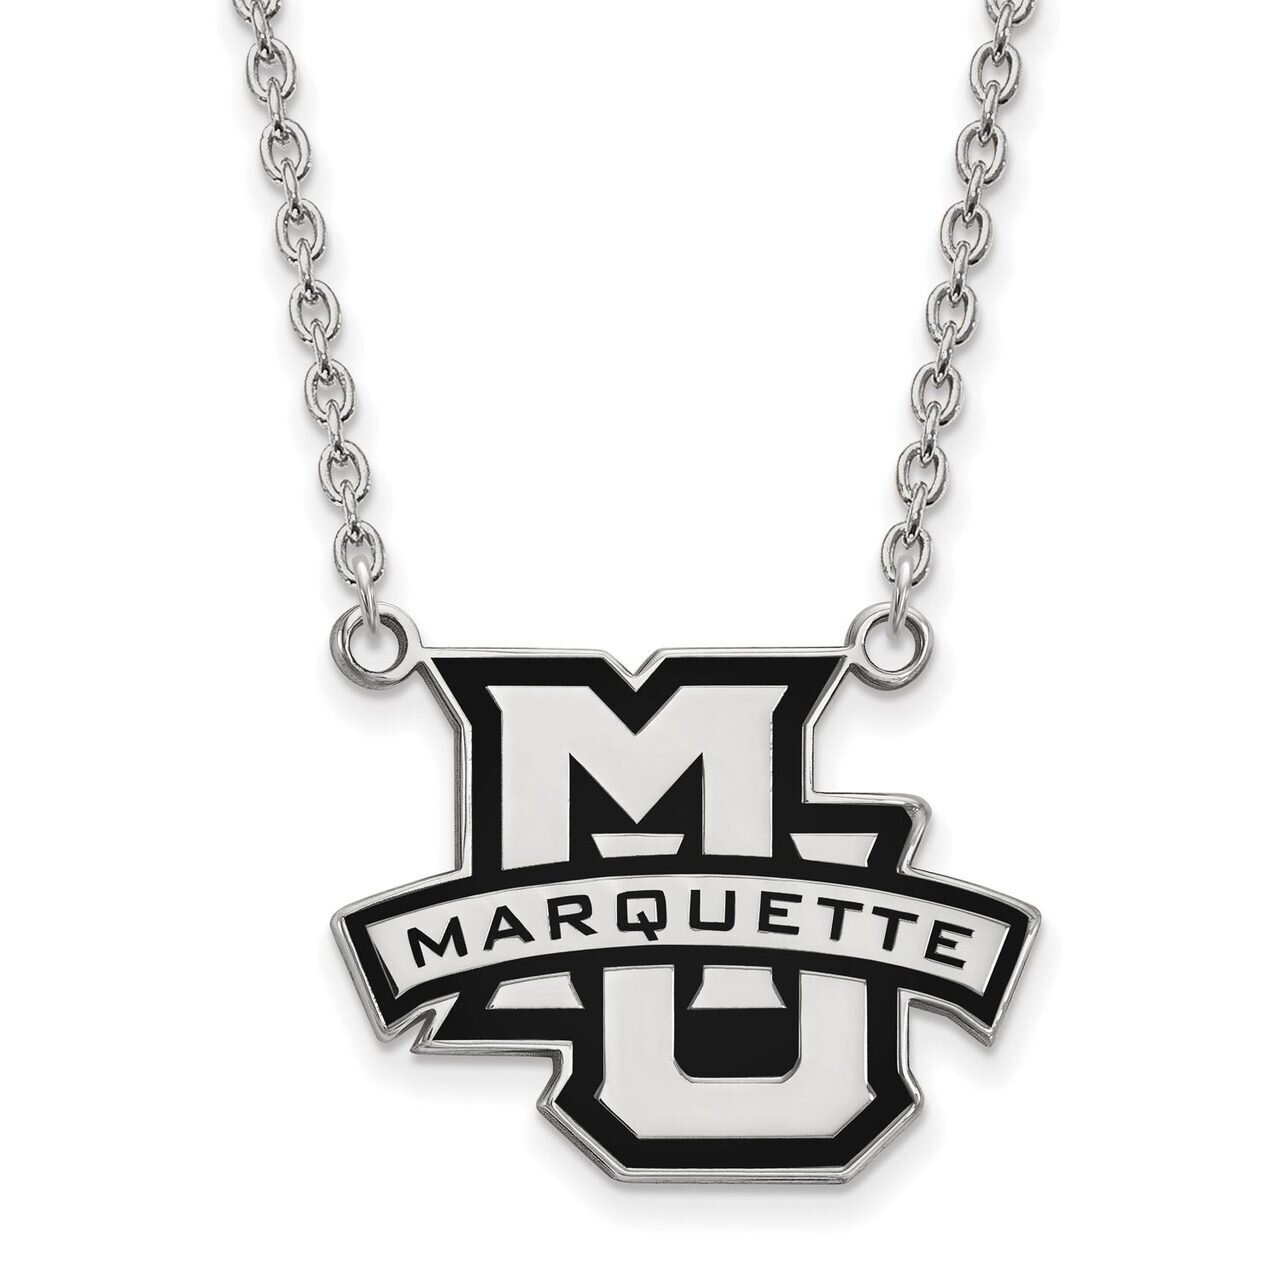 Marquette University Large Enamel Pendant with Chain Necklace Sterling Silver SS030MAR-18